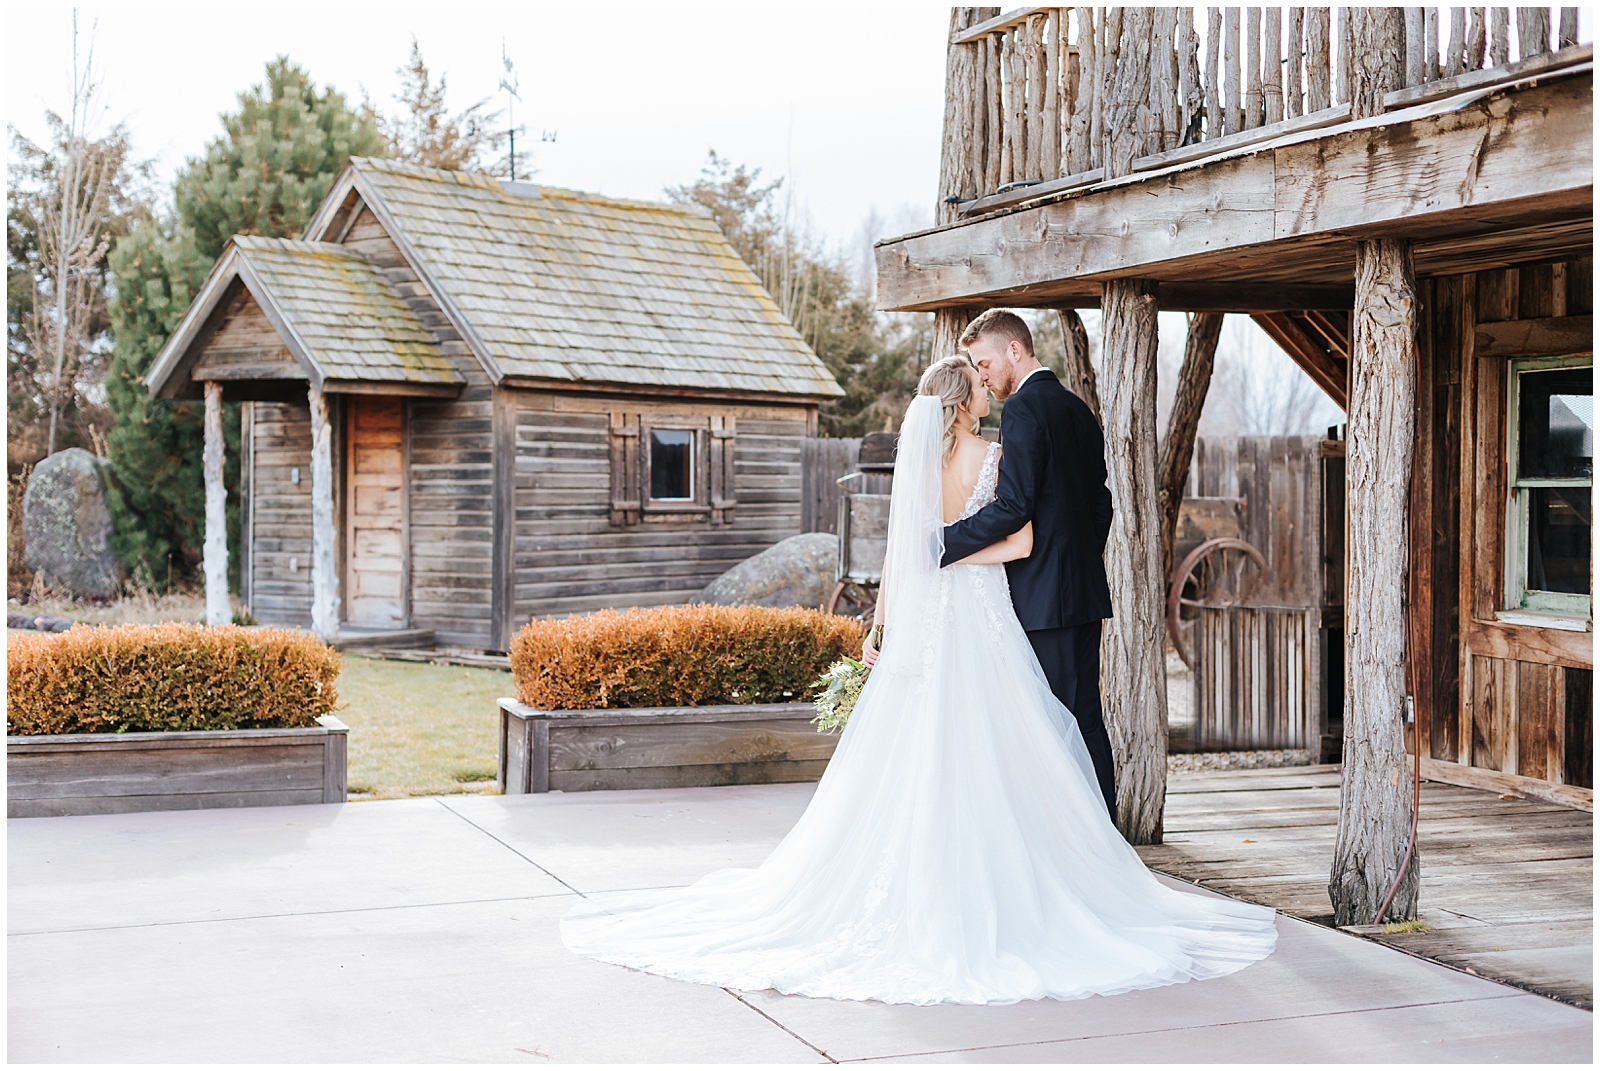 Winter Still Water Hollow Wedding Bride and Groom Snuggling by Rustic Barn